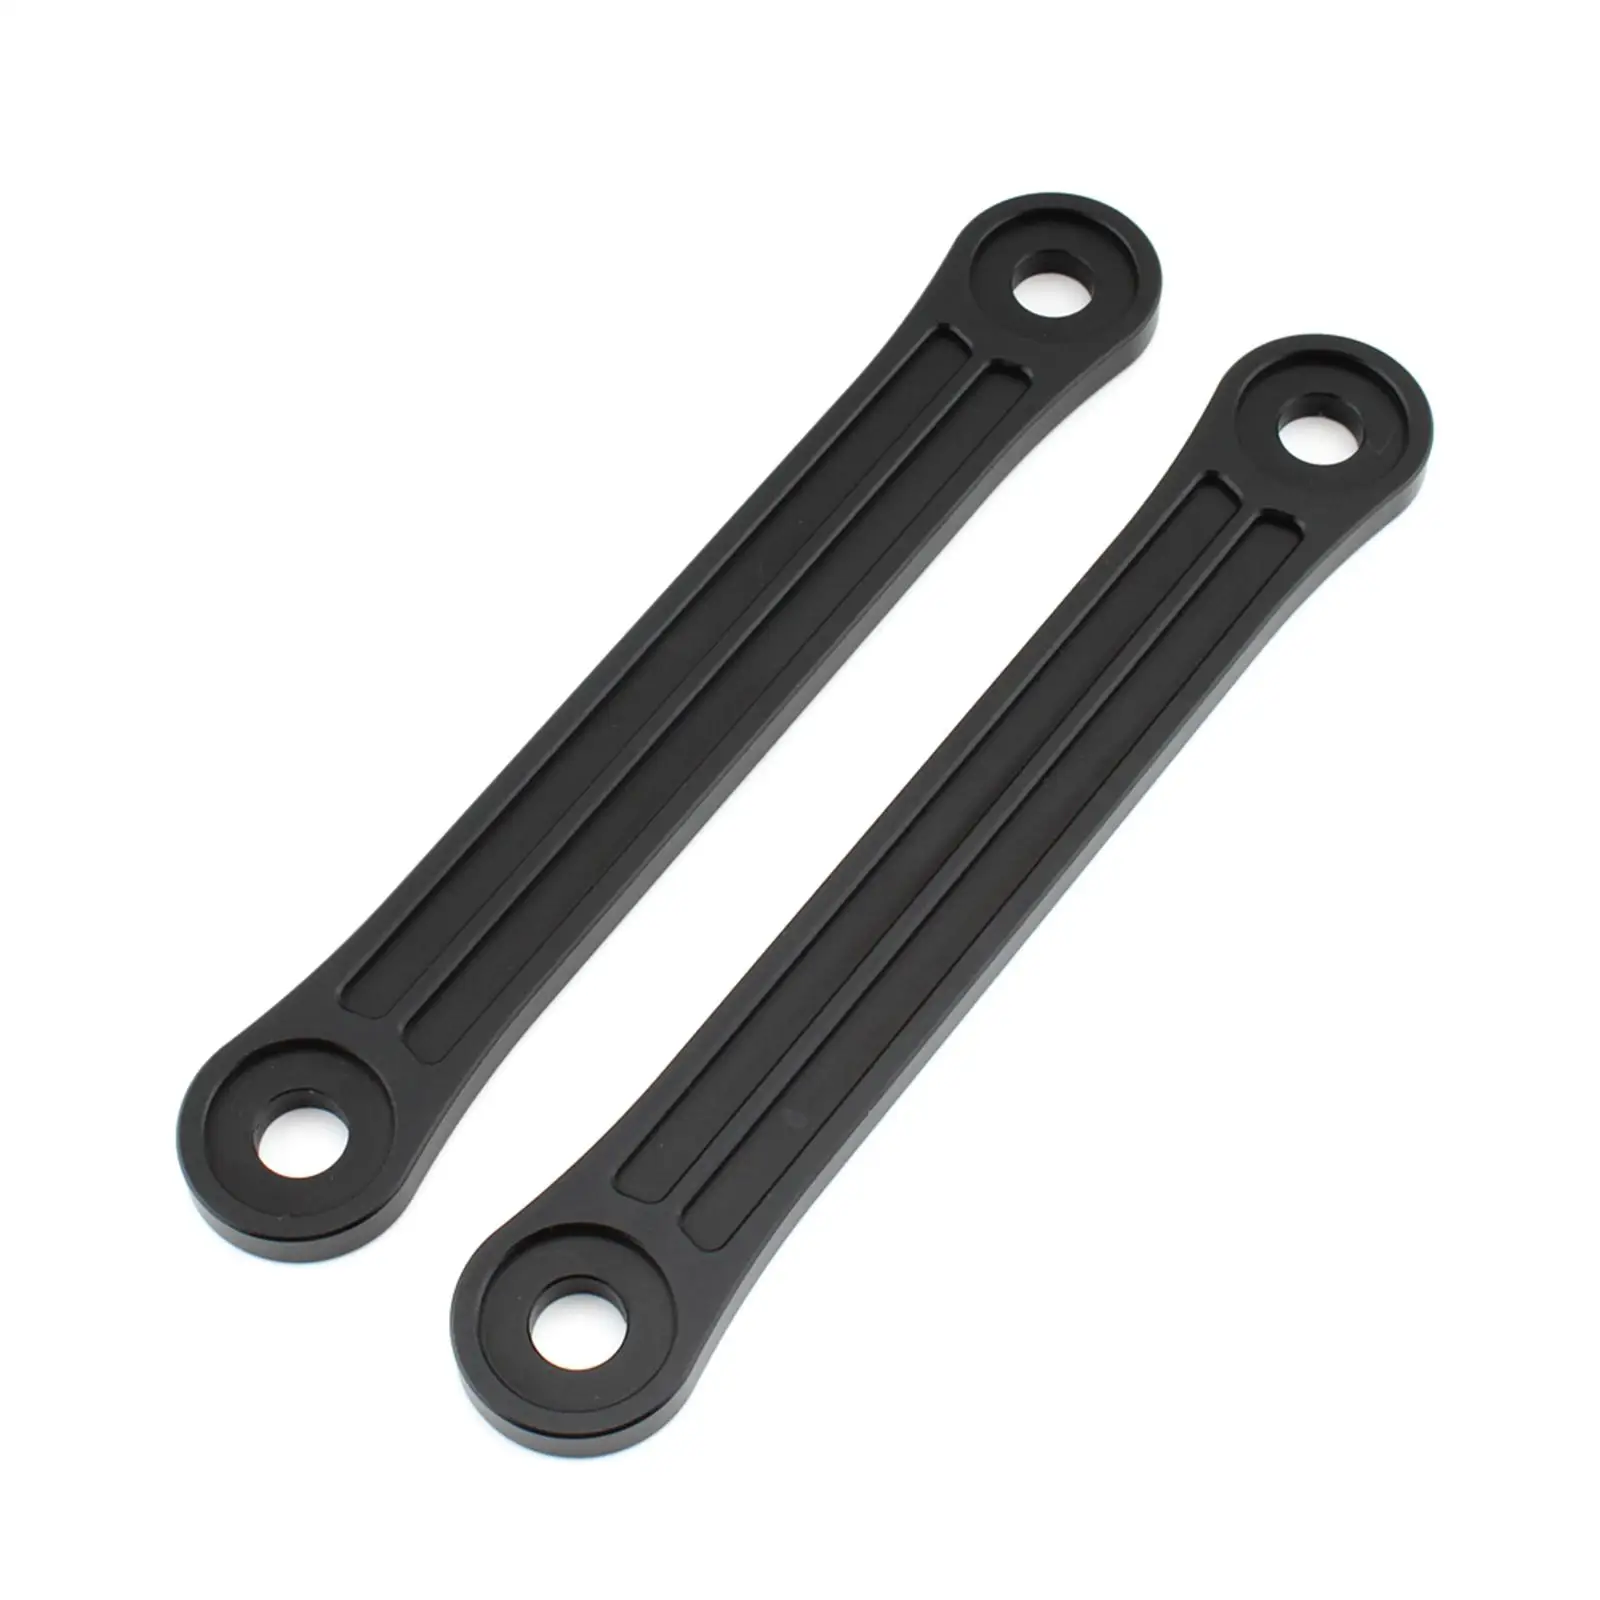 

2 Pieces Motorcycle Lowering Links Kit High Performance Durable Premium Easy to Install Replaces for Triumph Tiger 800